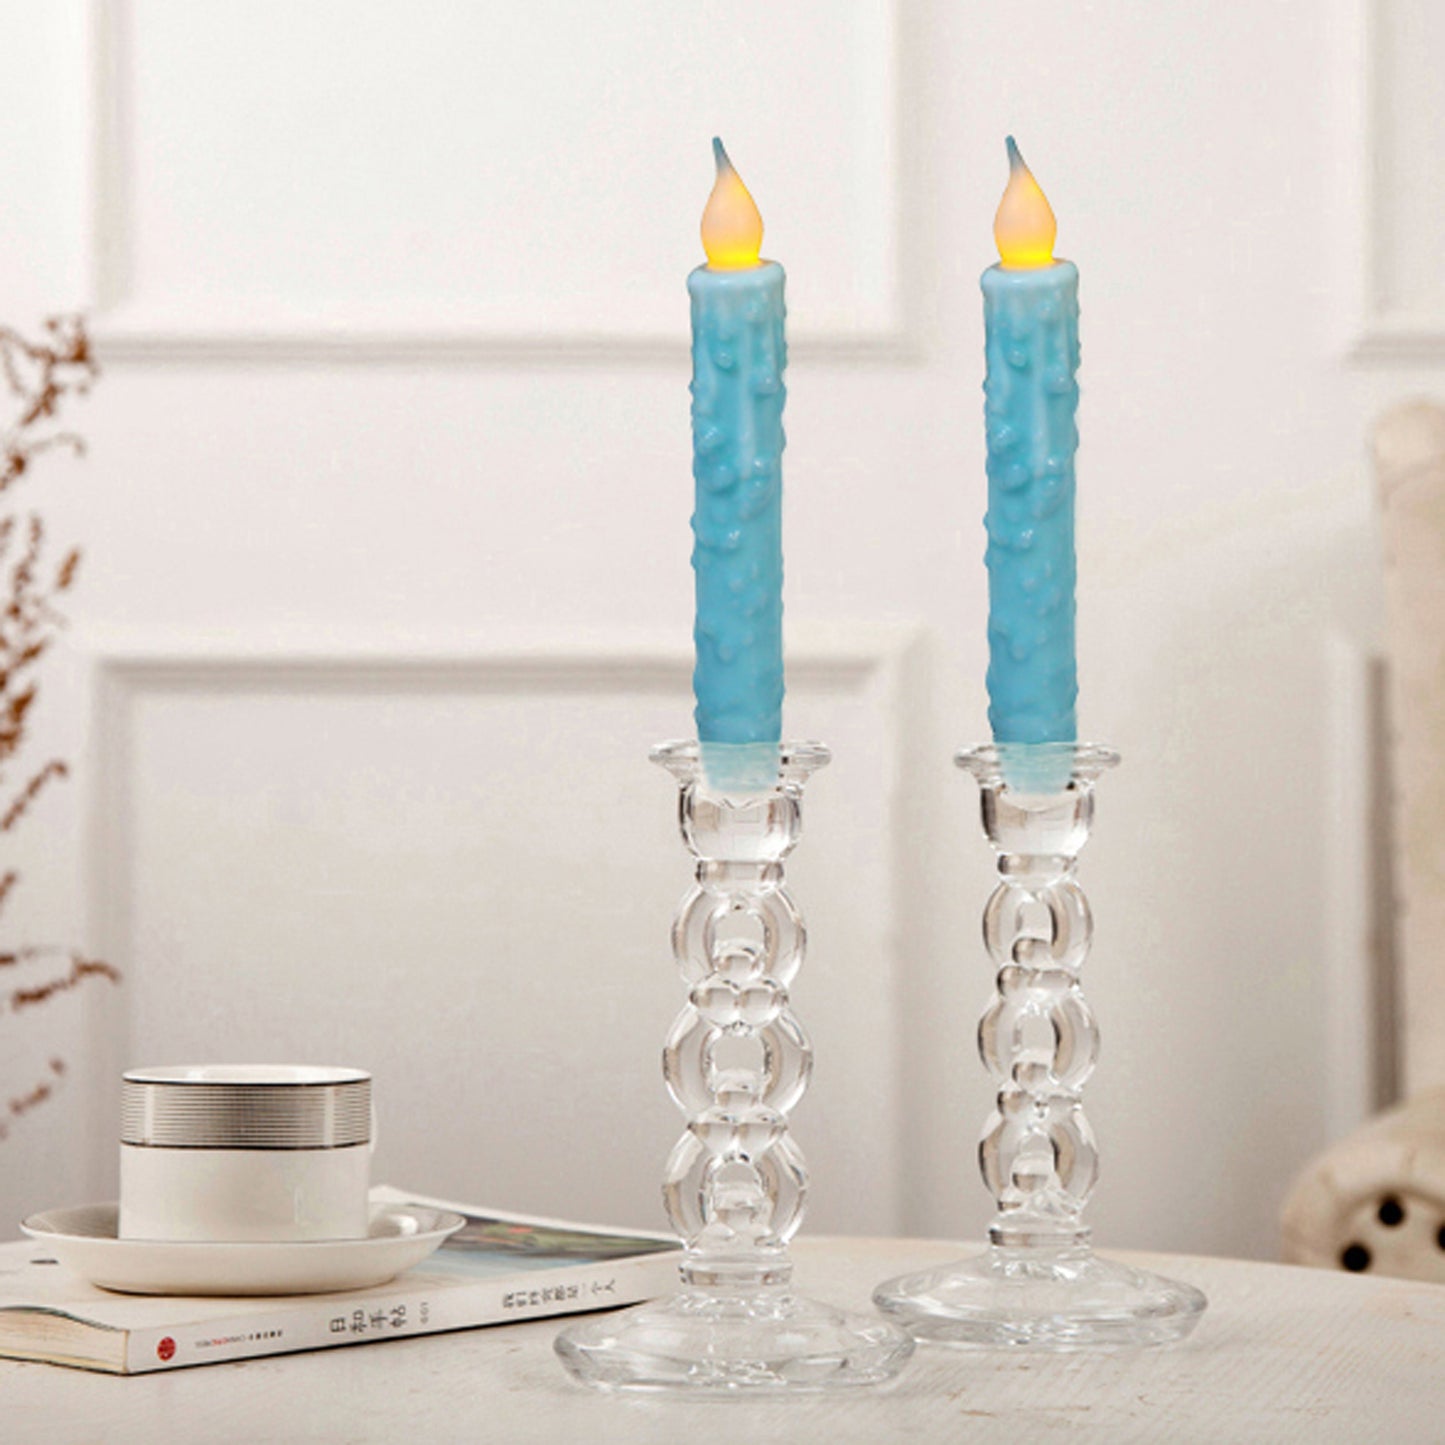 CVHOMEDECO. Real Wax Hand Dipped Battery Operated LED Timer Taper Candles Rustic Primitive Flameless Lights Decor, 6.75 Inch, Teal, 6 PCS in a Package